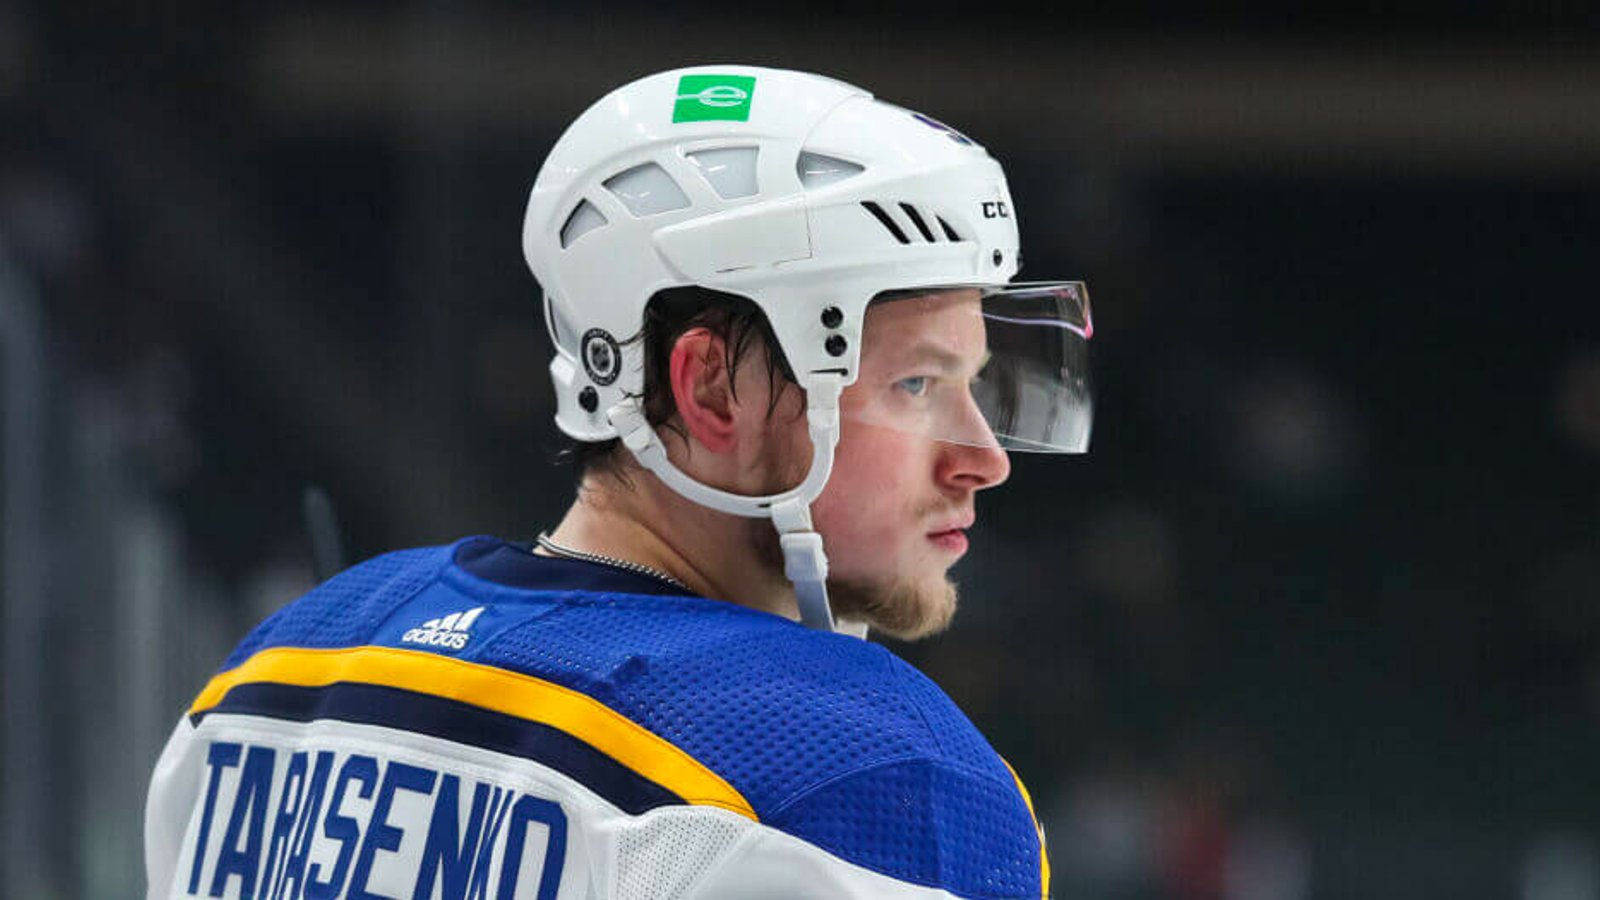 Tarasenko looks to have a change of heart, says he will give “100%” effort for Blues this season